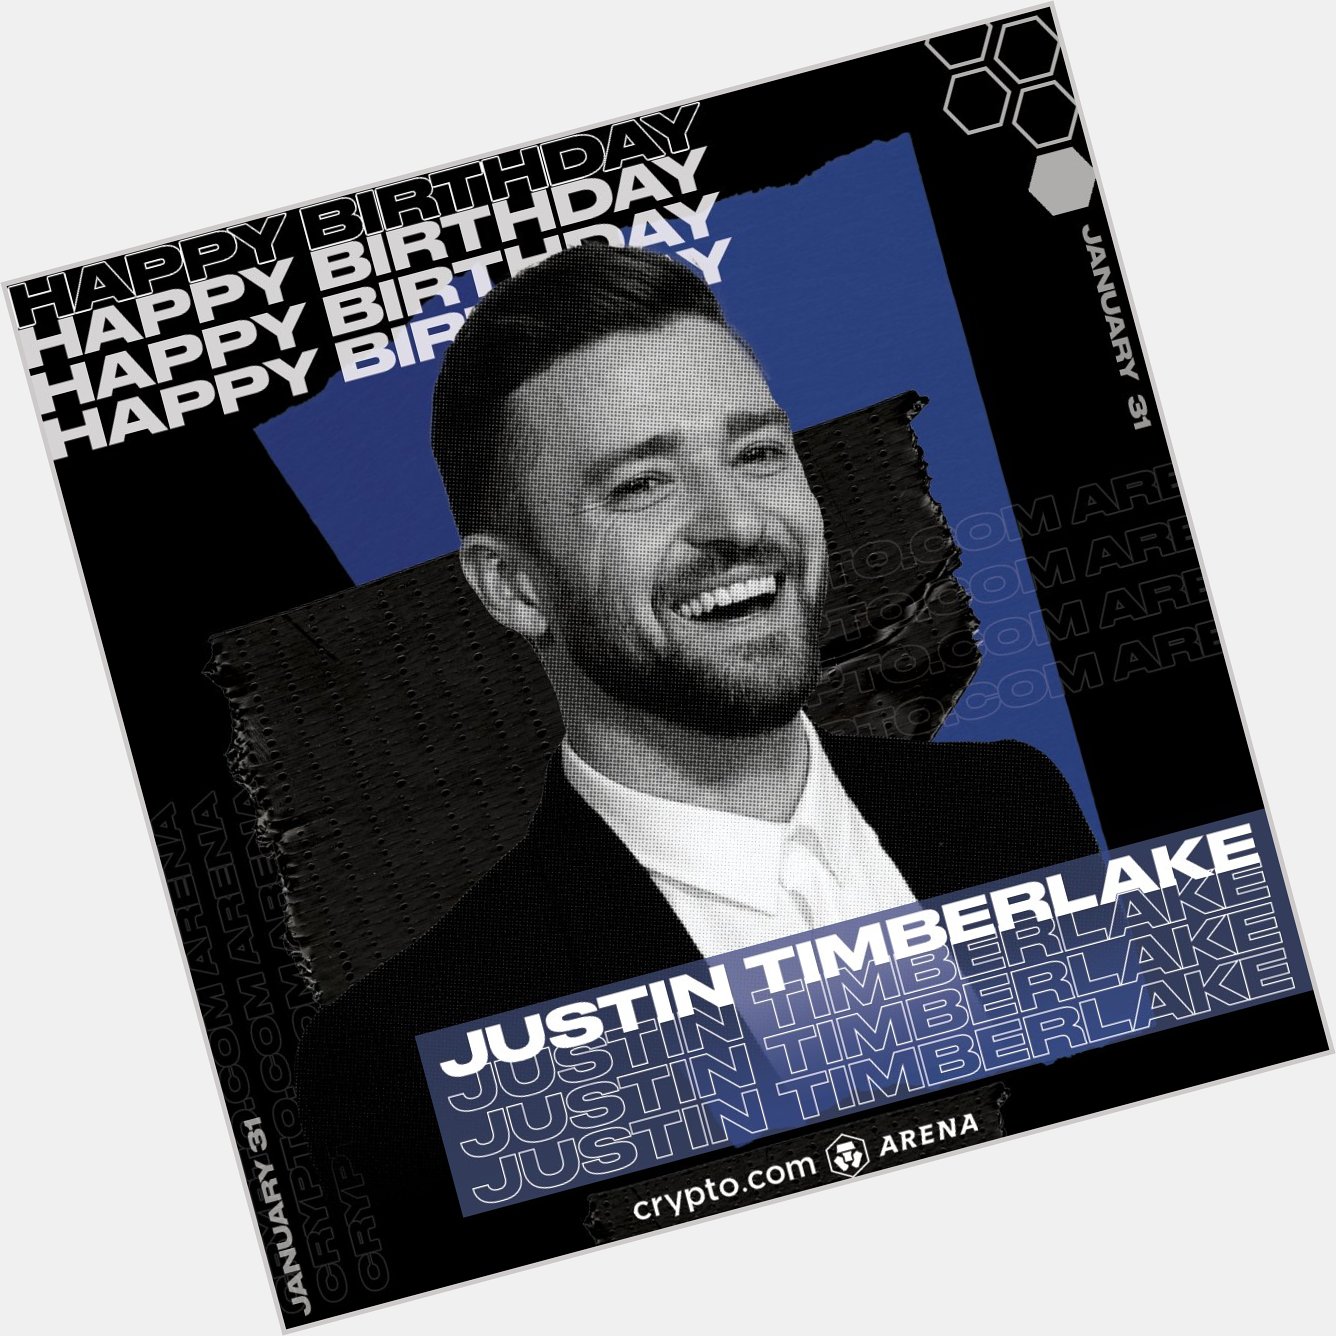 Happy birthday to Justin Timberlake! Drop your favorite JT song in the comments 